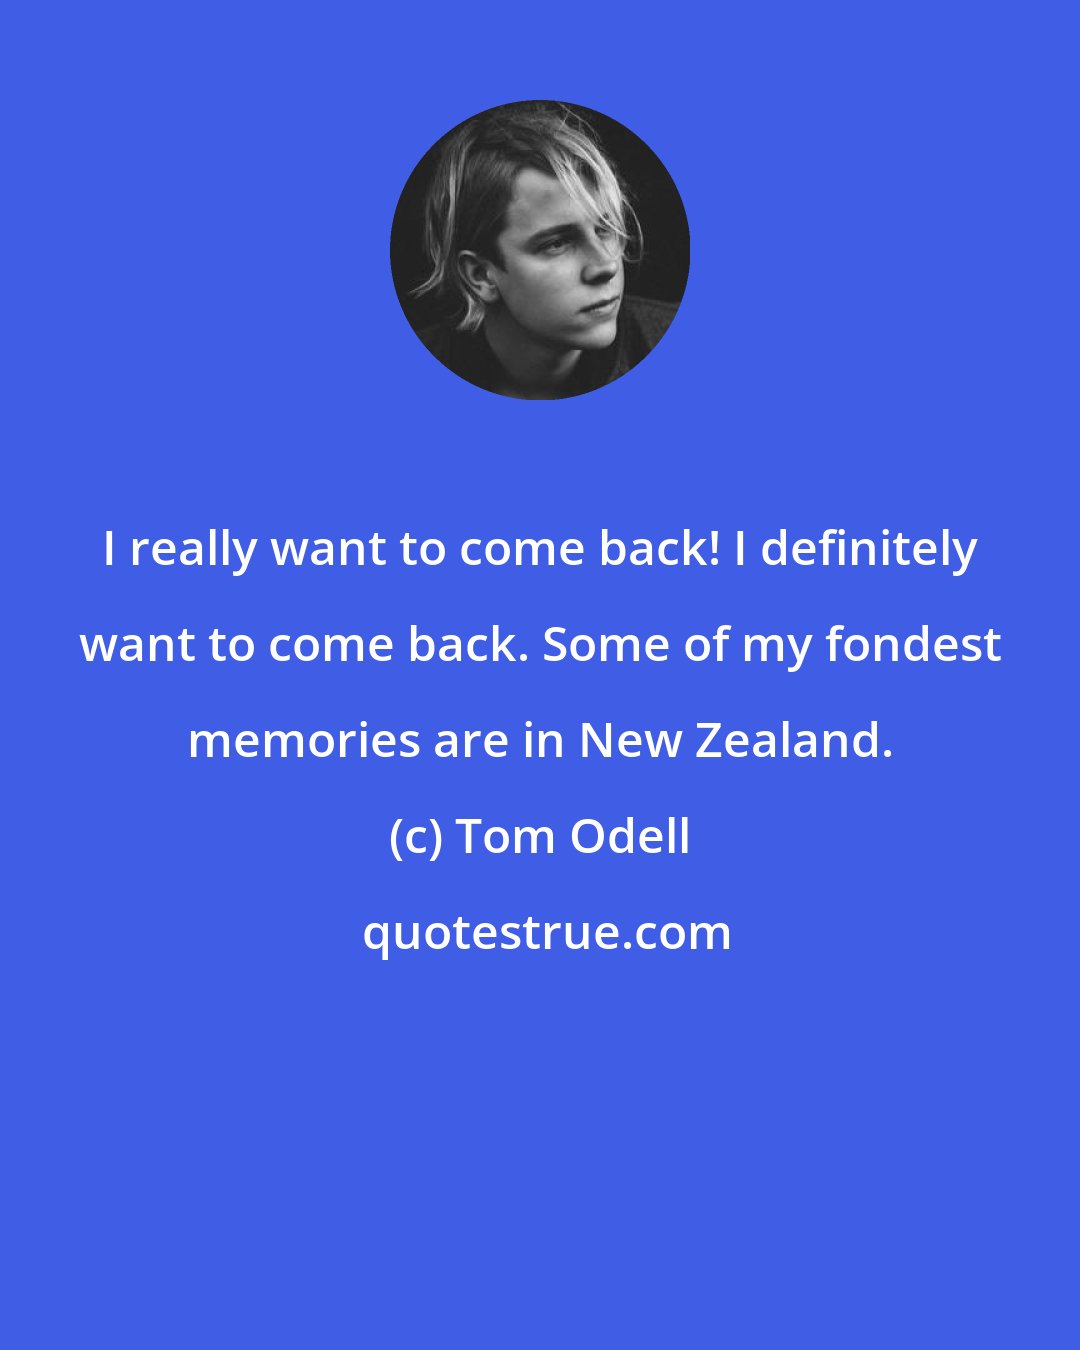 Tom Odell: I really want to come back! I definitely want to come back. Some of my fondest memories are in New Zealand.